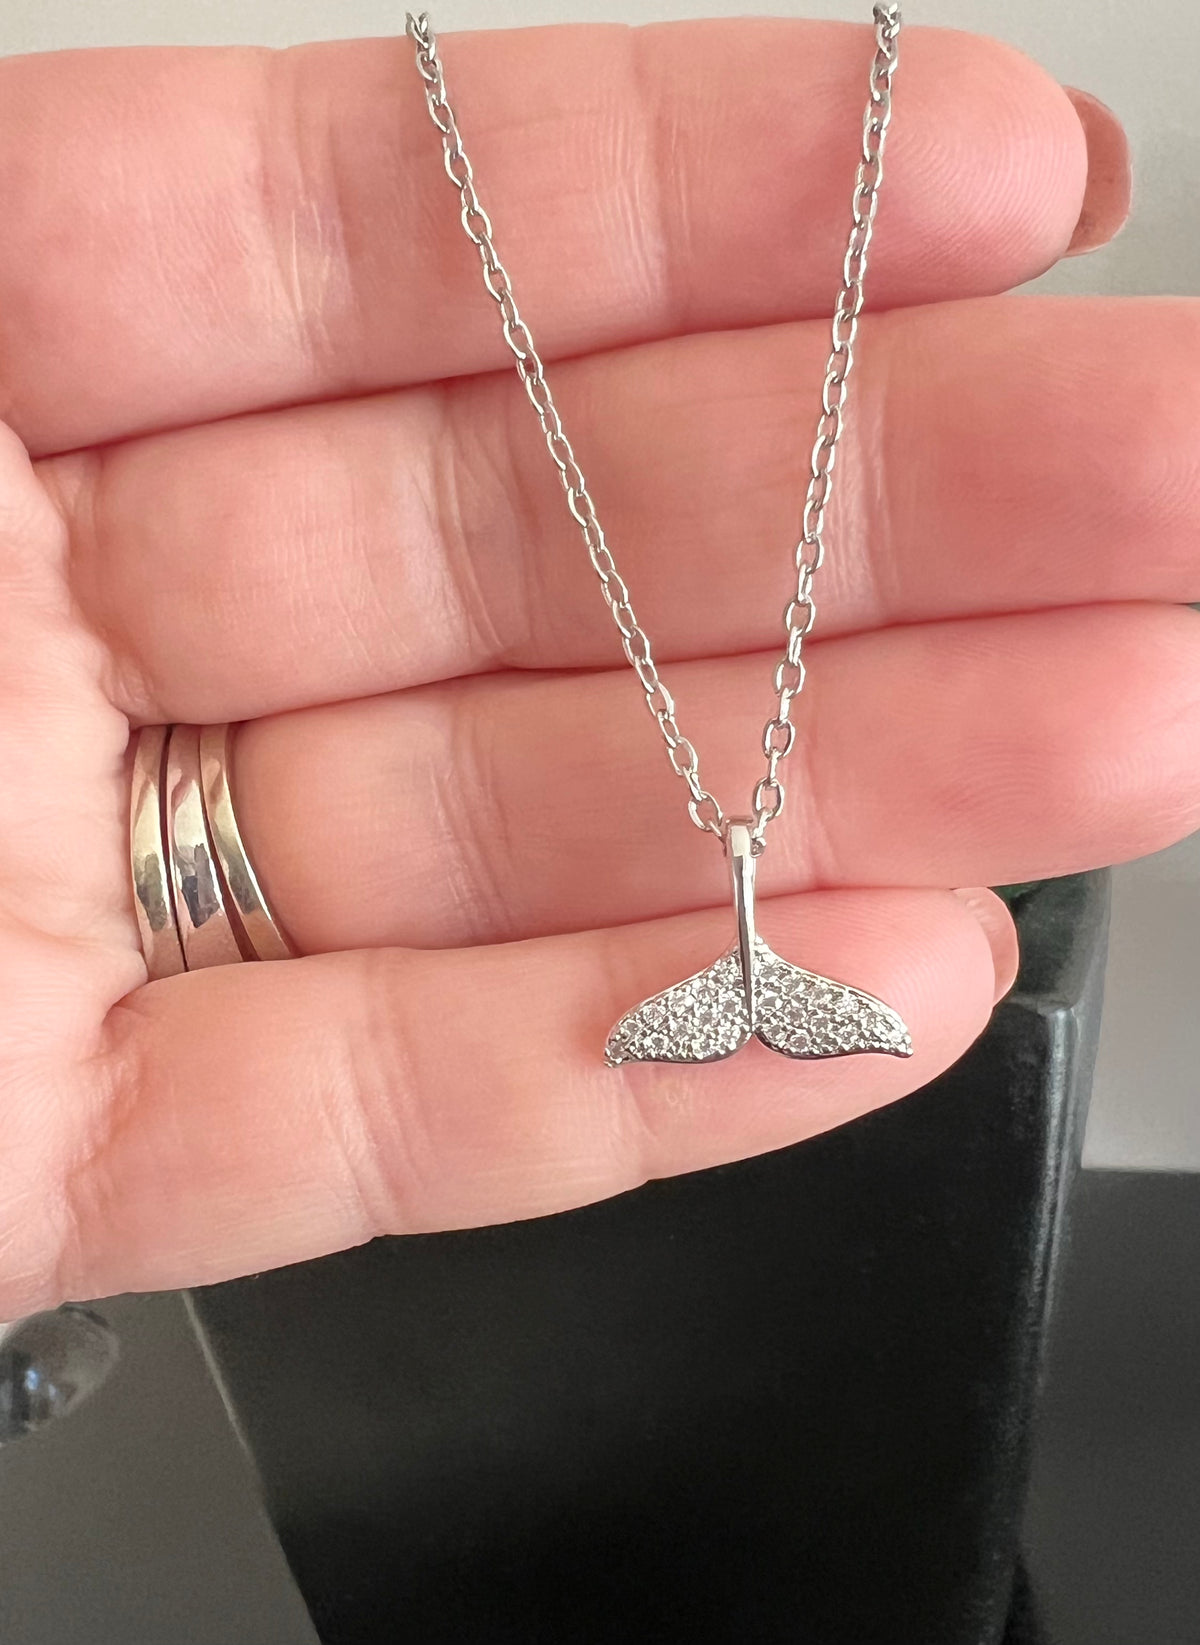 Silver Necklace | Dolphin Tail | Whale Tail | Mermaid Tail | The Tail the Truth Pendant Necklace features a majestic tail crafted with exquisite detail. Only the discerning will know...is it a dolphin, whale, or mermaid tail? Wearing one of these pendants is believed to be a symbol of well-being and protection. Let this pendant be a reminder that you are strong, protected, and loved.